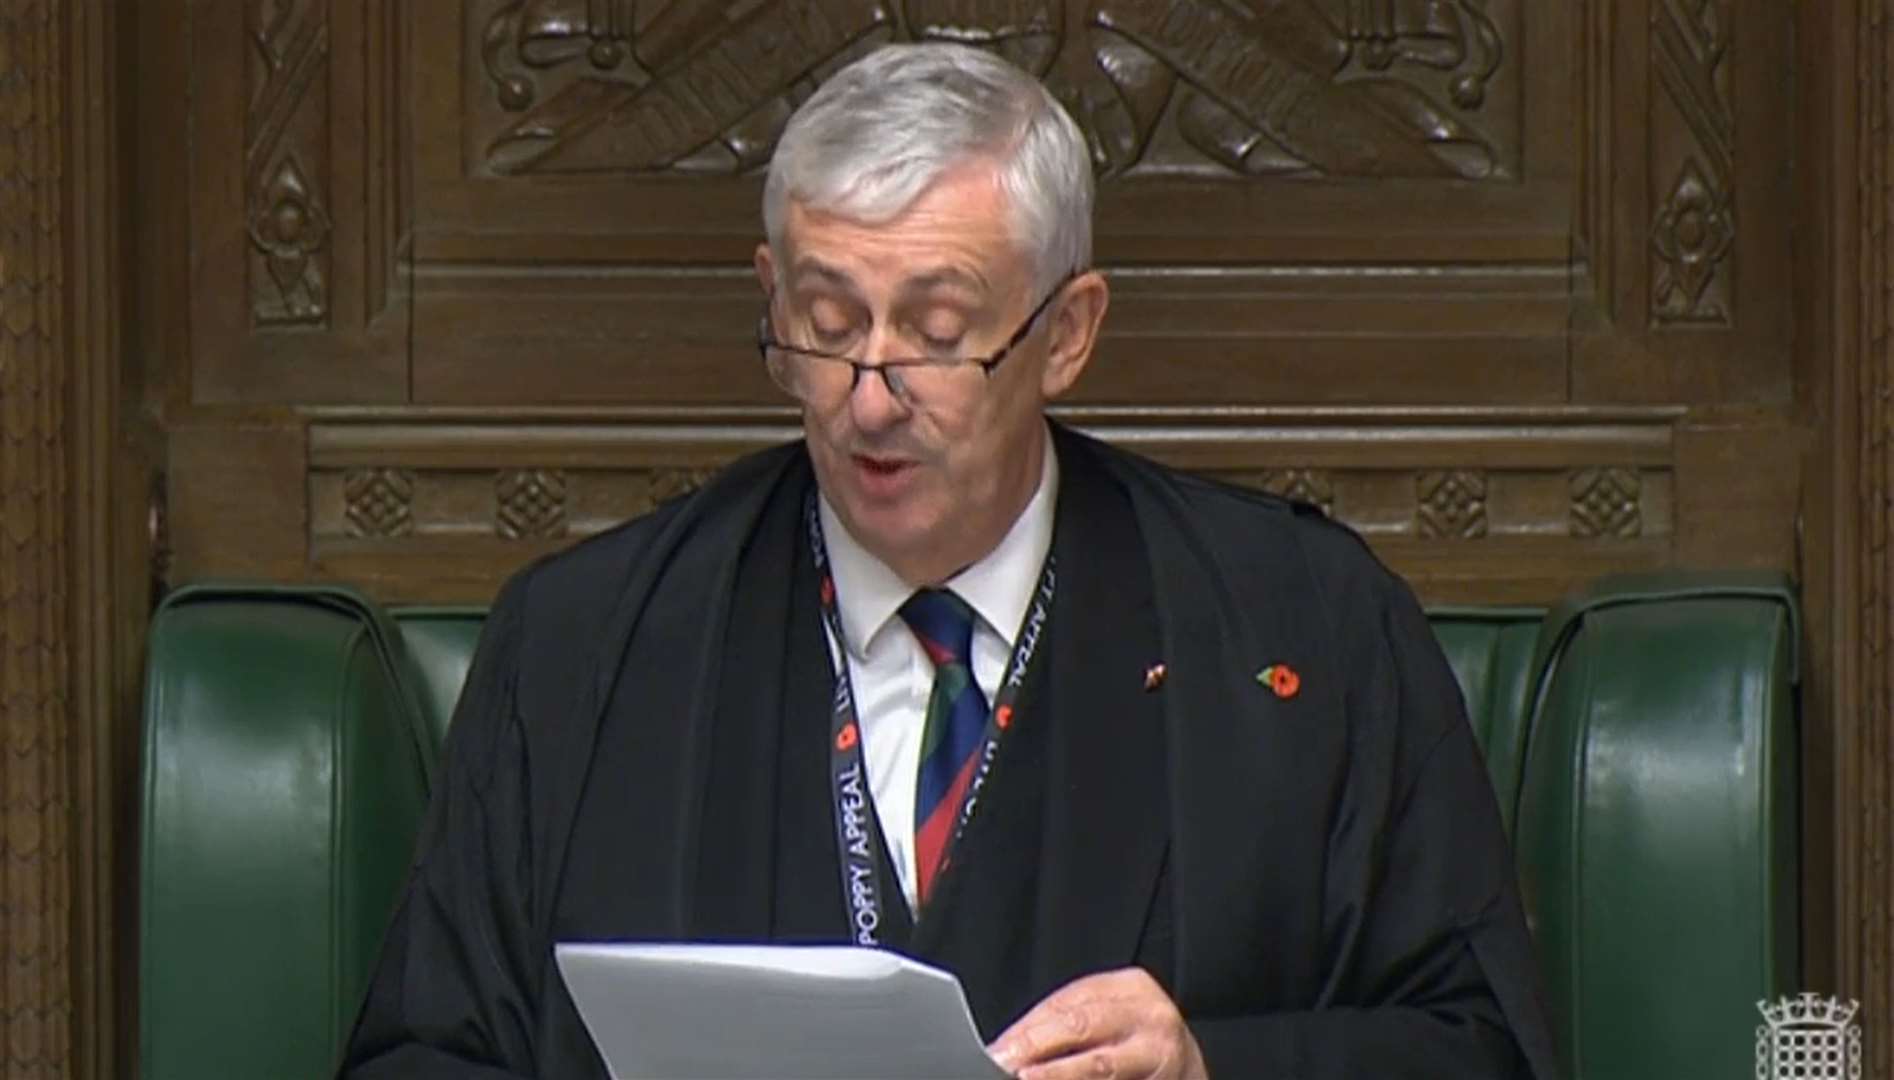 Sir Lindsay Hoyle circulated the alert to MPs (House of Commons/PA)